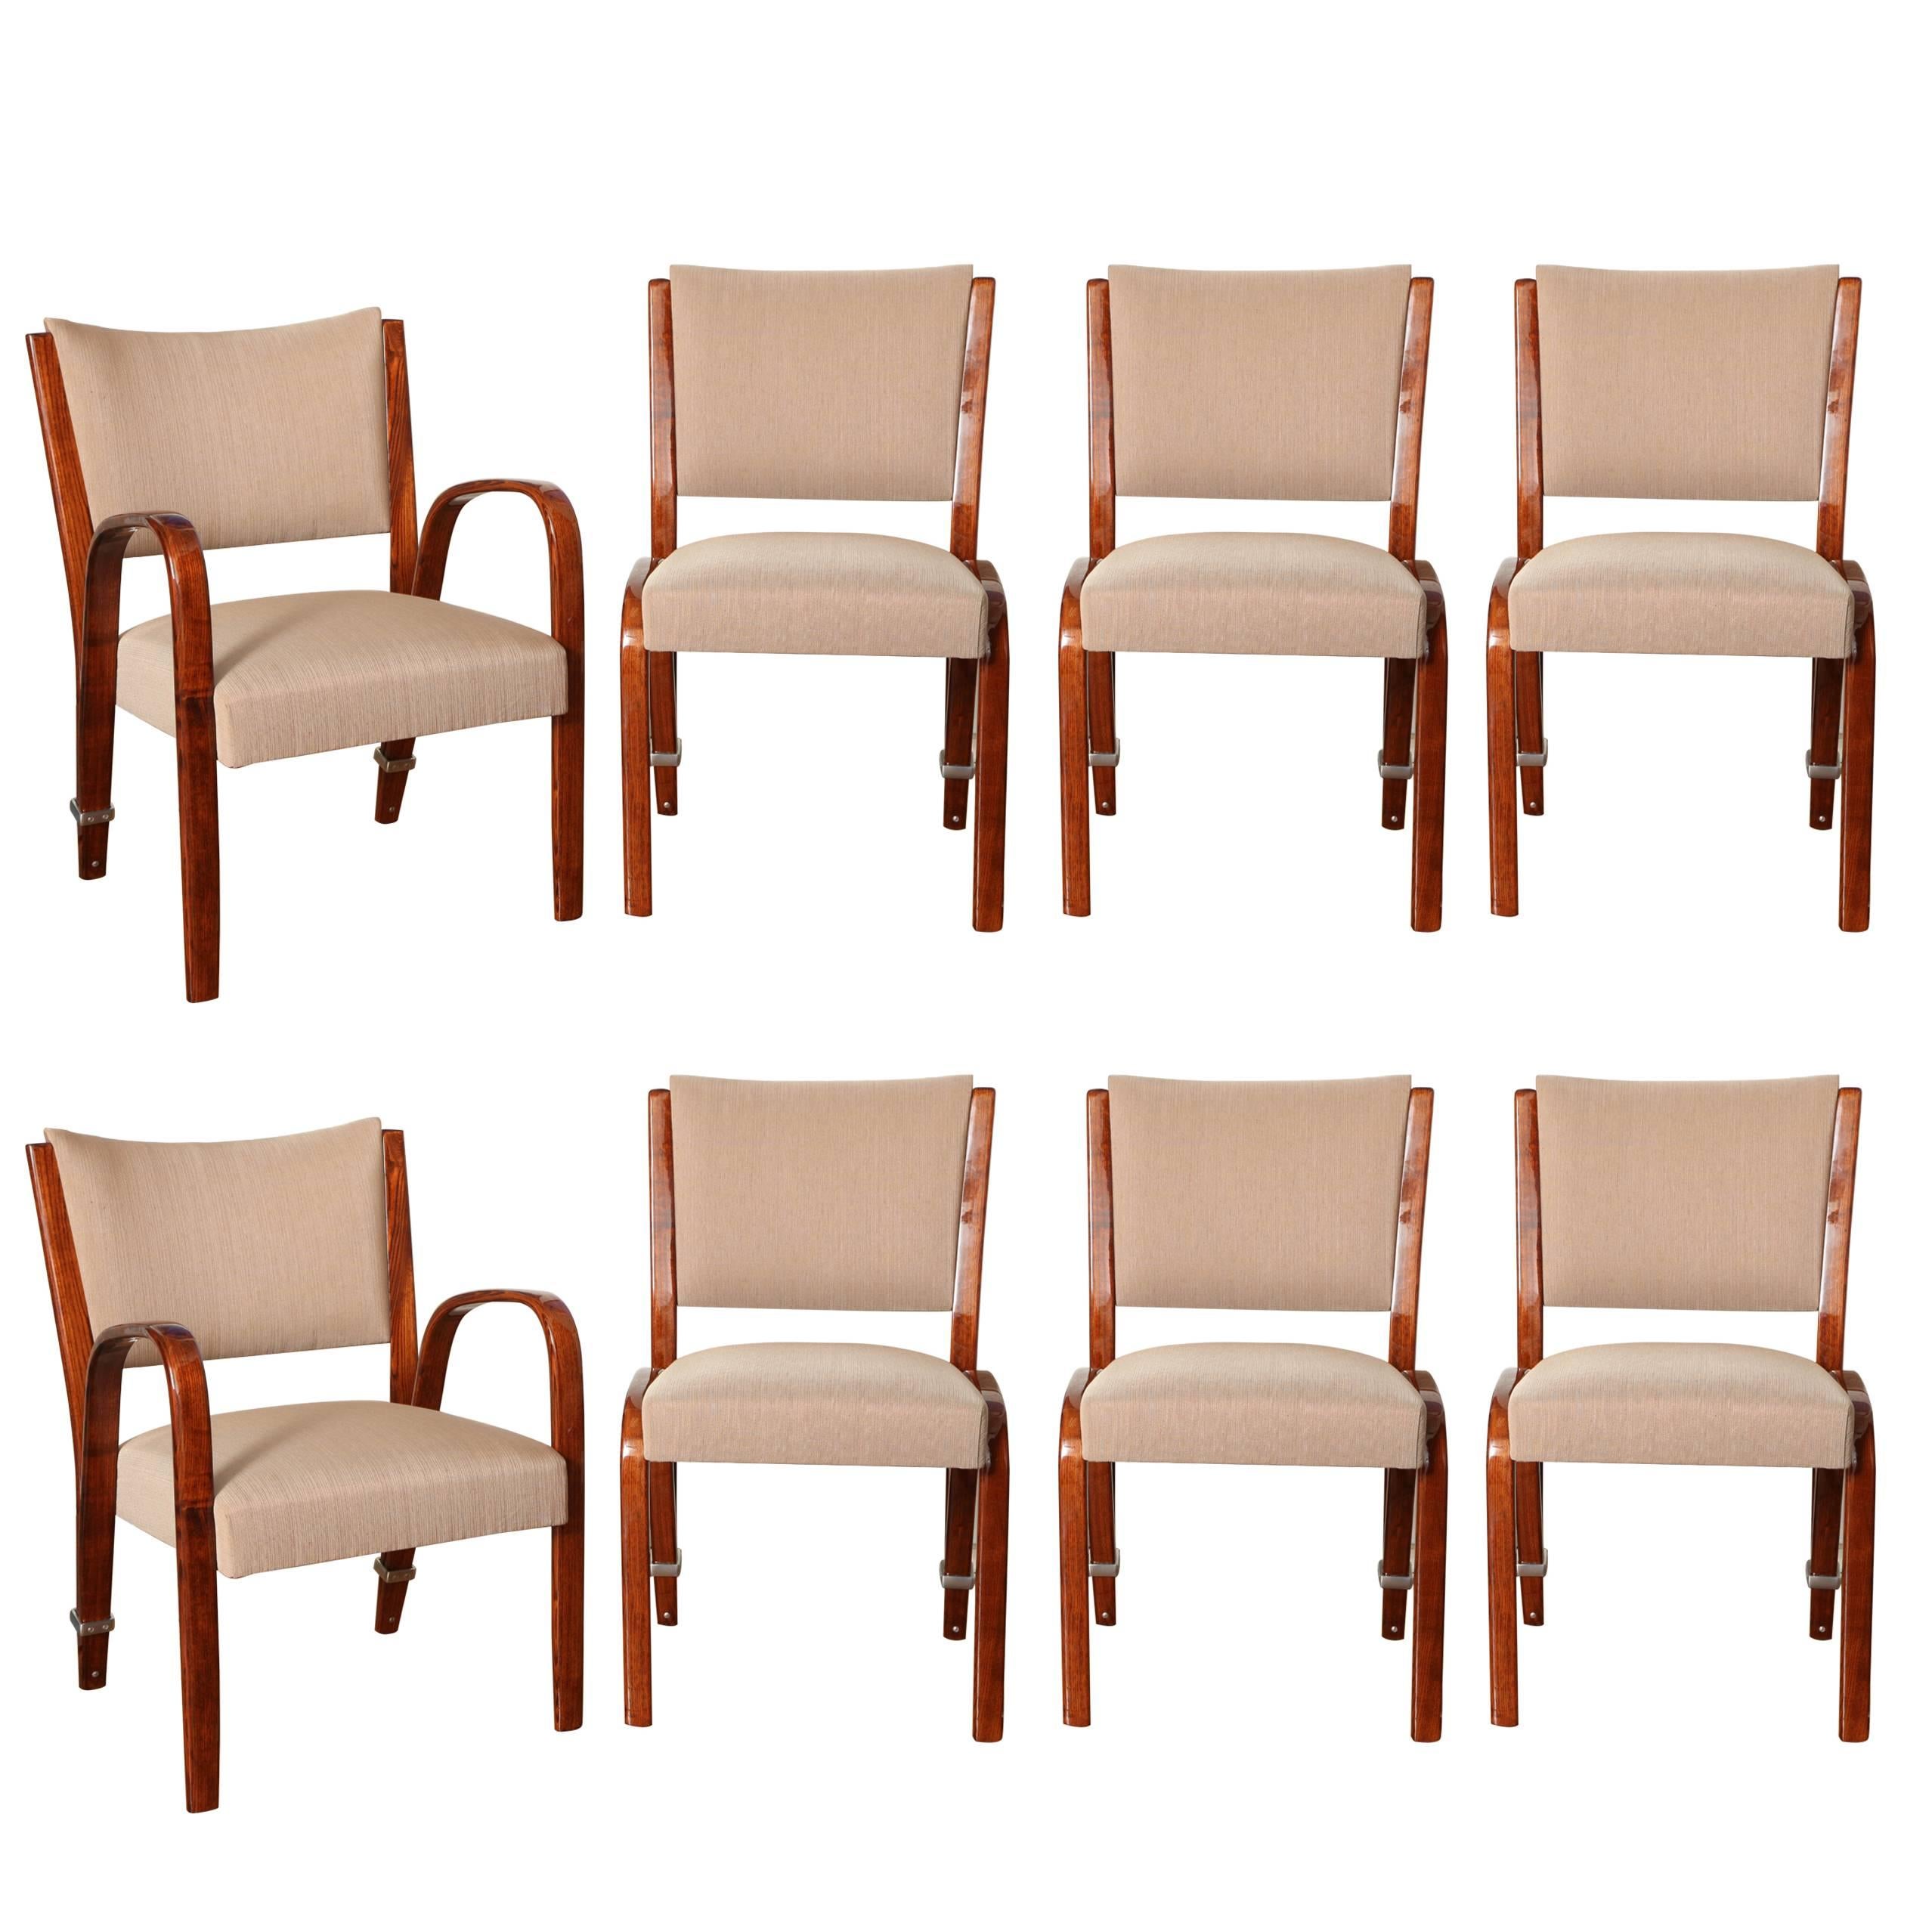 Extraordinary Suite of Dining Chairs by Steiner